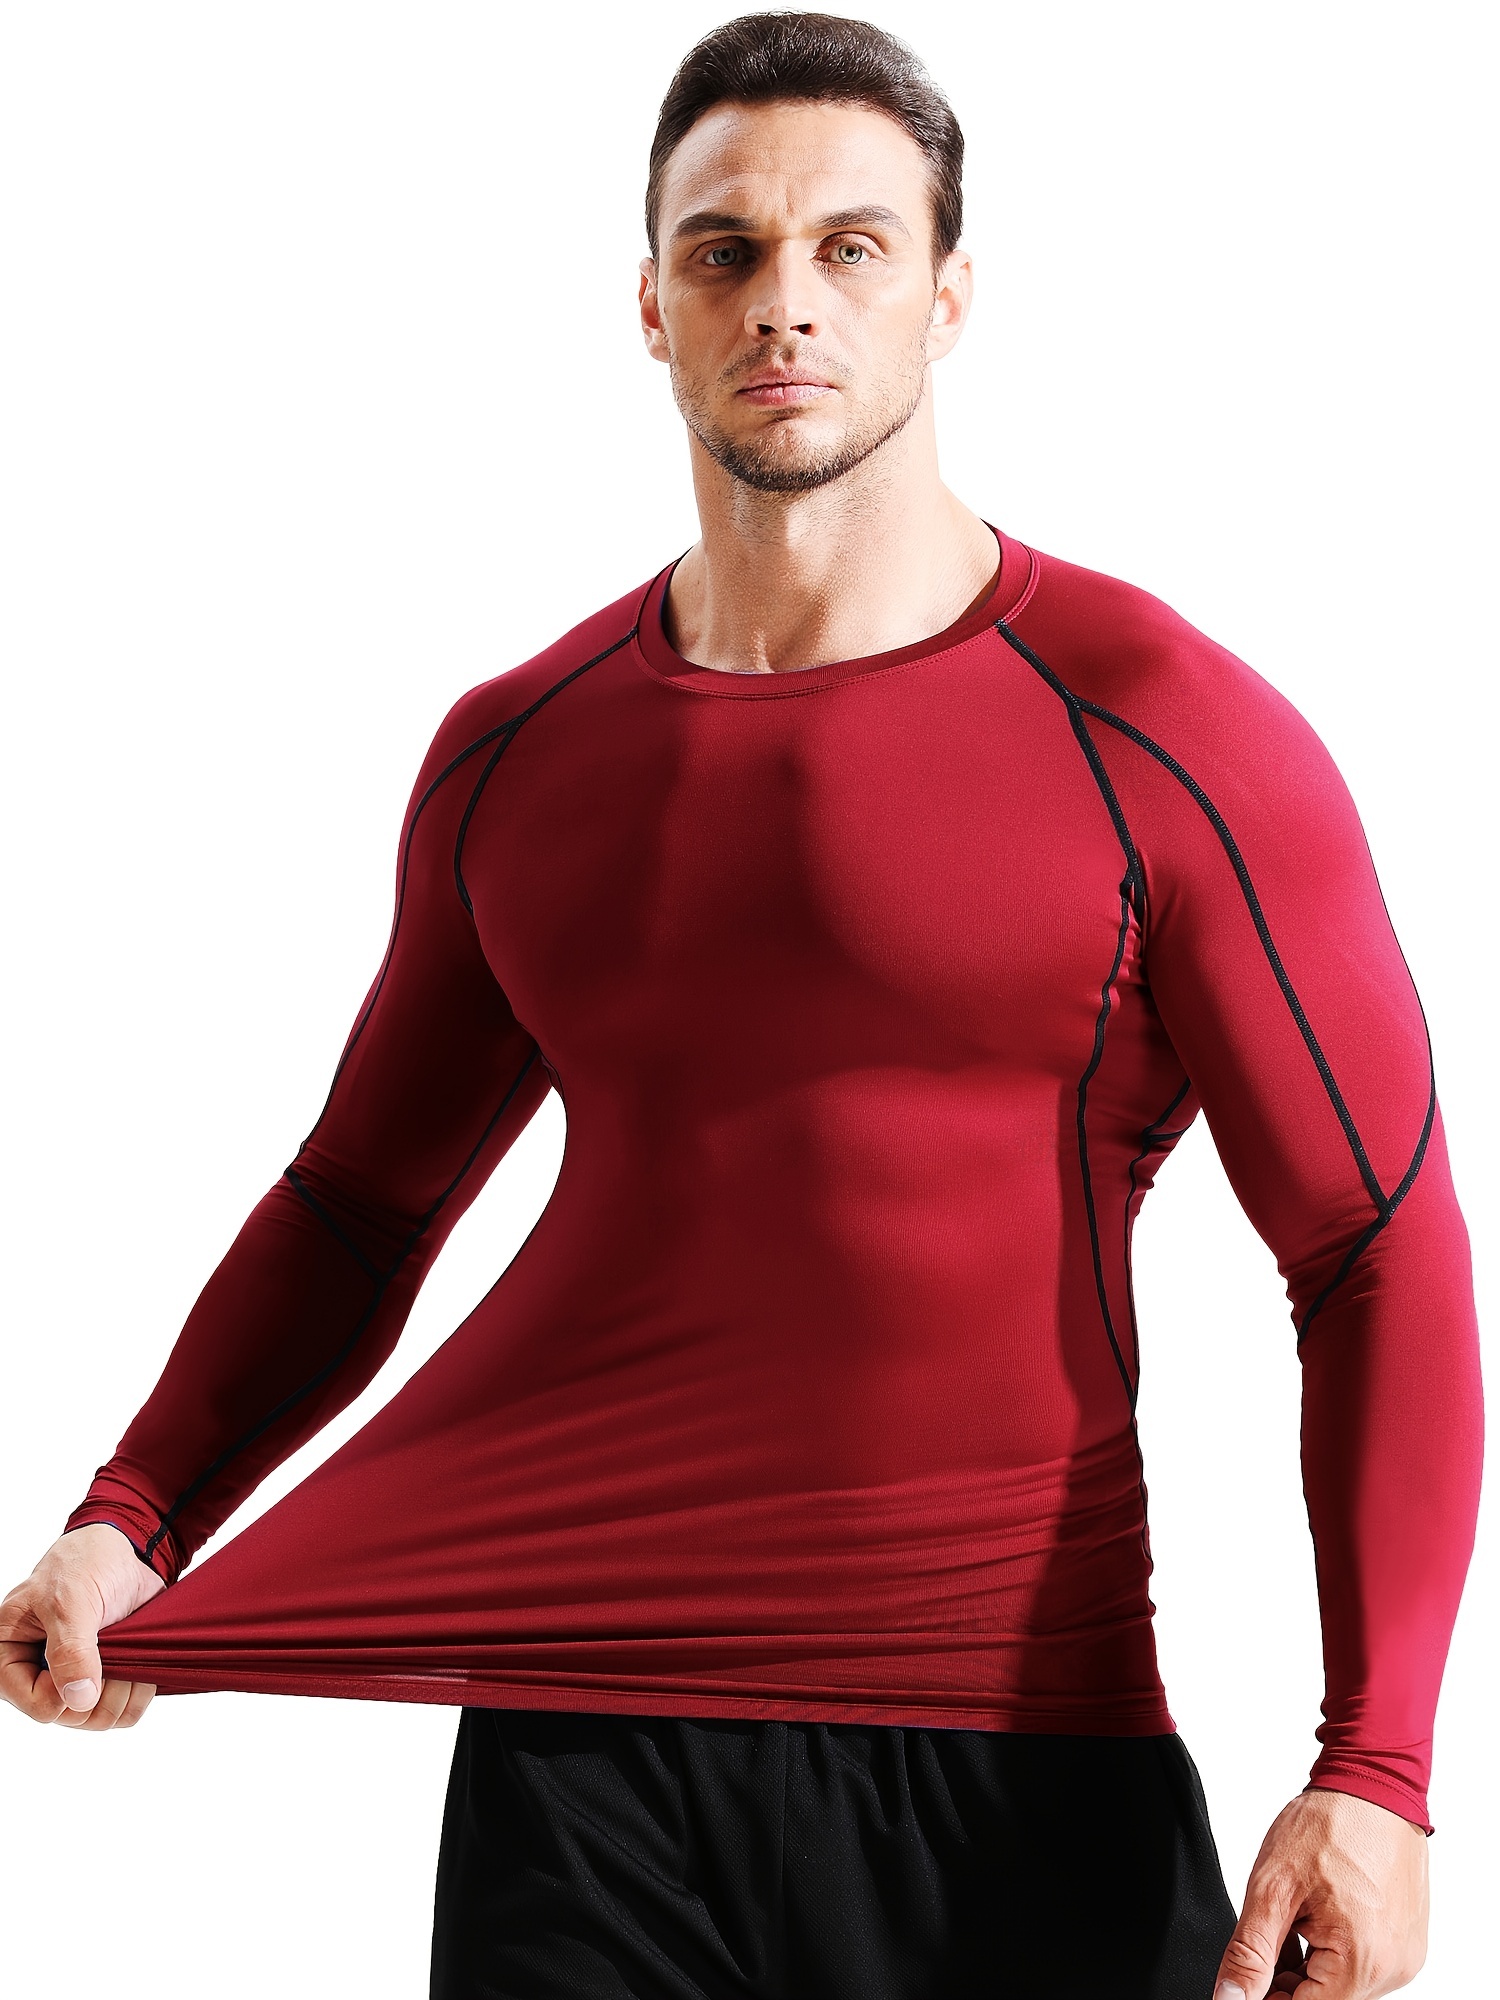 Wavsuf Fashion Workout Clothes Men Sets For Cold Deals Long-Sleeve